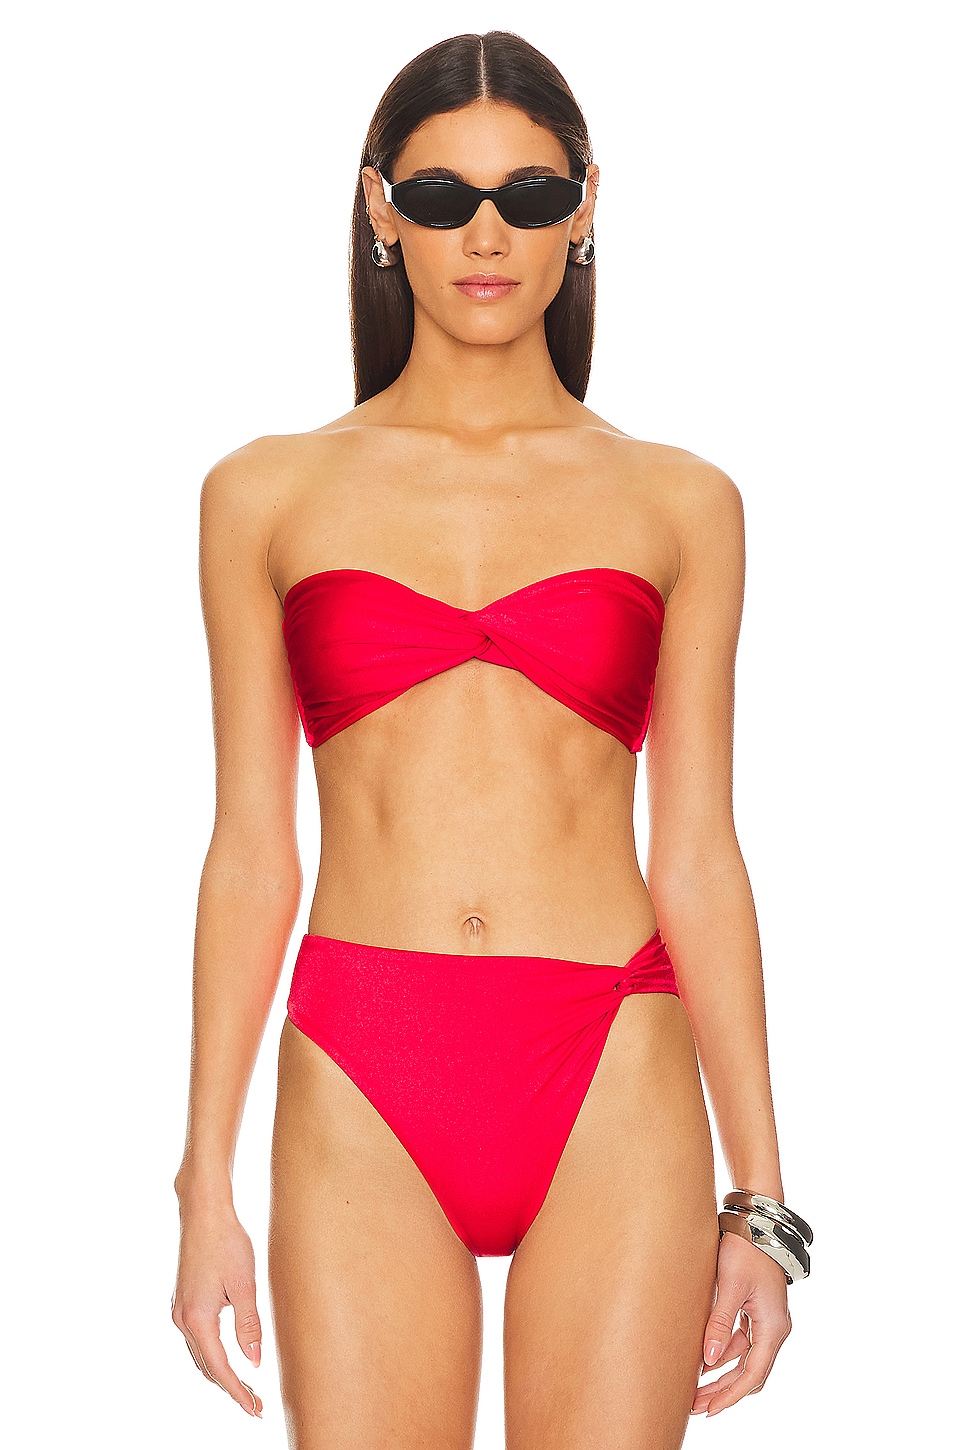 Baobab Vera Bandeau Top in Red - Size XS